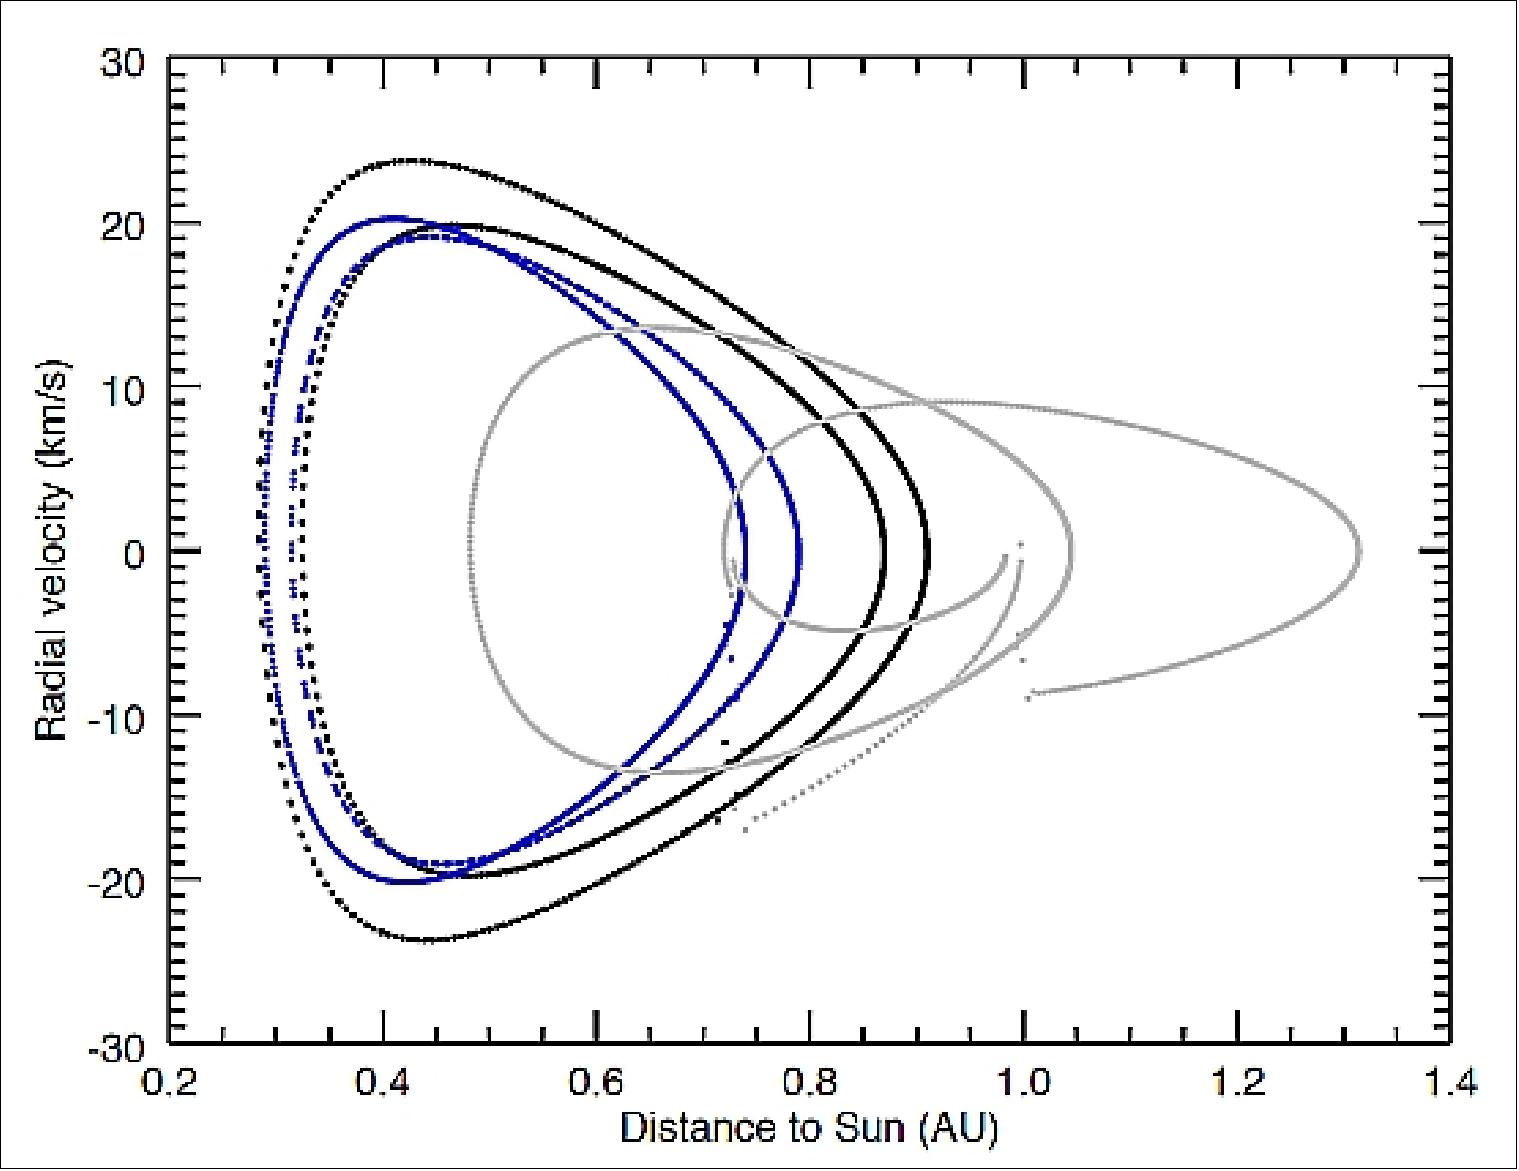 Figure 100: Solar Orbiter radial velocity as a function of the heliocentric distance time, for the January 2017 launch. The nominal, cruise and extended phases are represented by black, grey and blue curves, respectively (image credit: IAS)